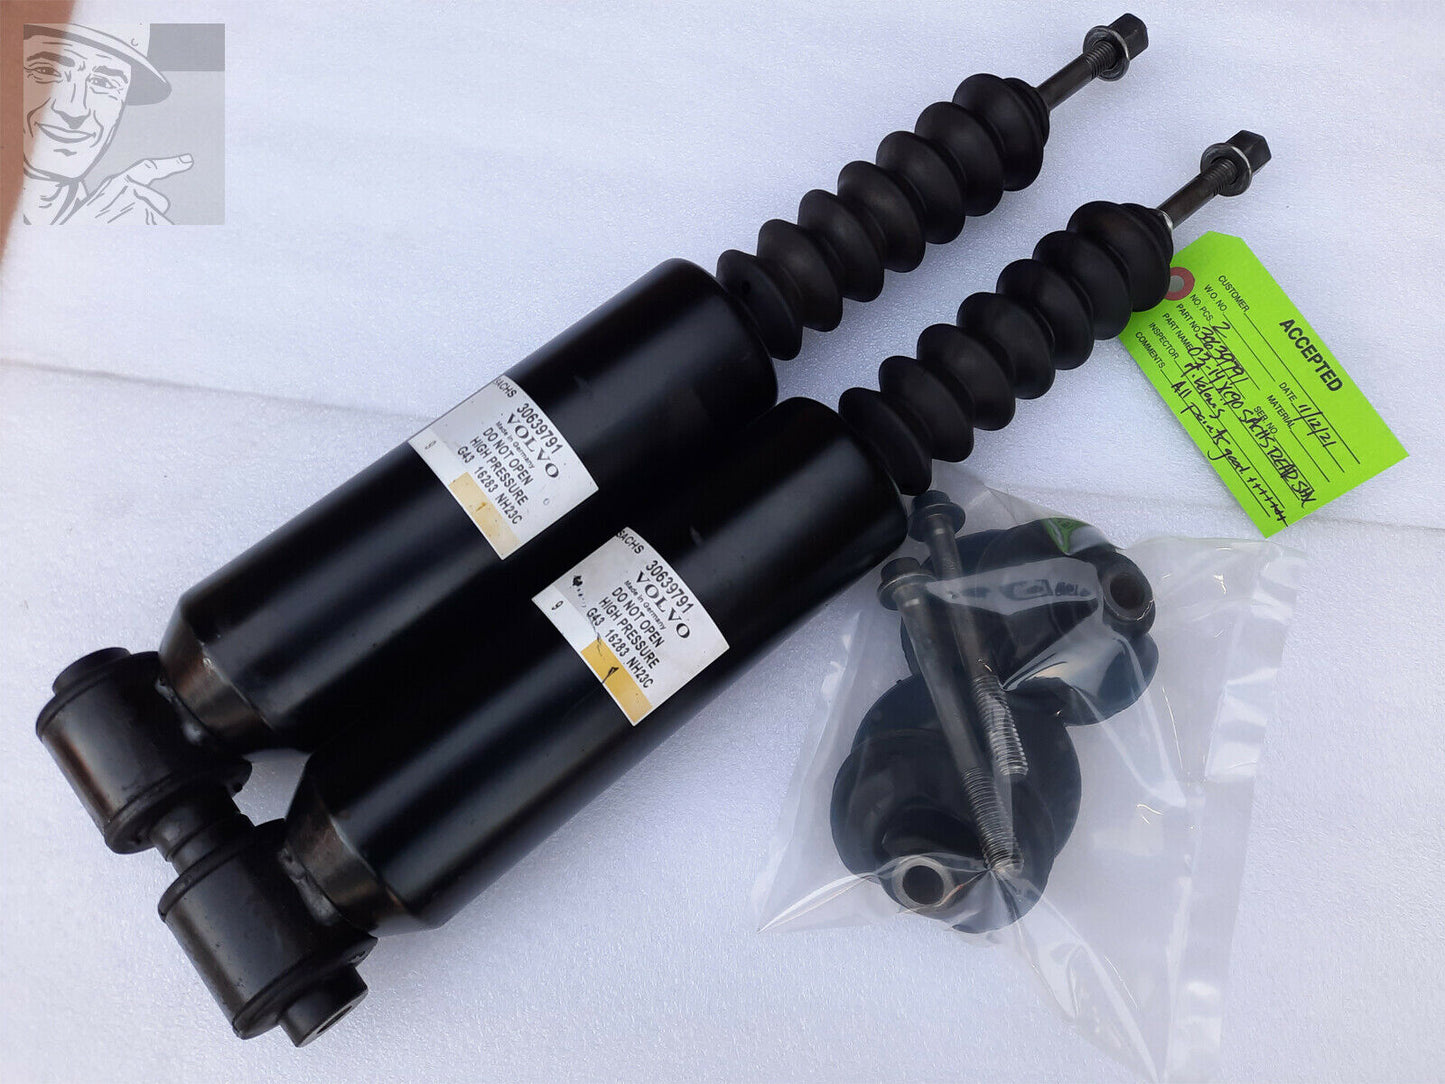 Original Equipment (OE) self-leveling rear shocks for 2003 2004 2005 2006 2007 2008 2009 2010 2011 2012 2013 Volvo XC90 with Self-Leveling Rear Suspension. SACHS 30639791. Equivalent to SACHS  30683451.